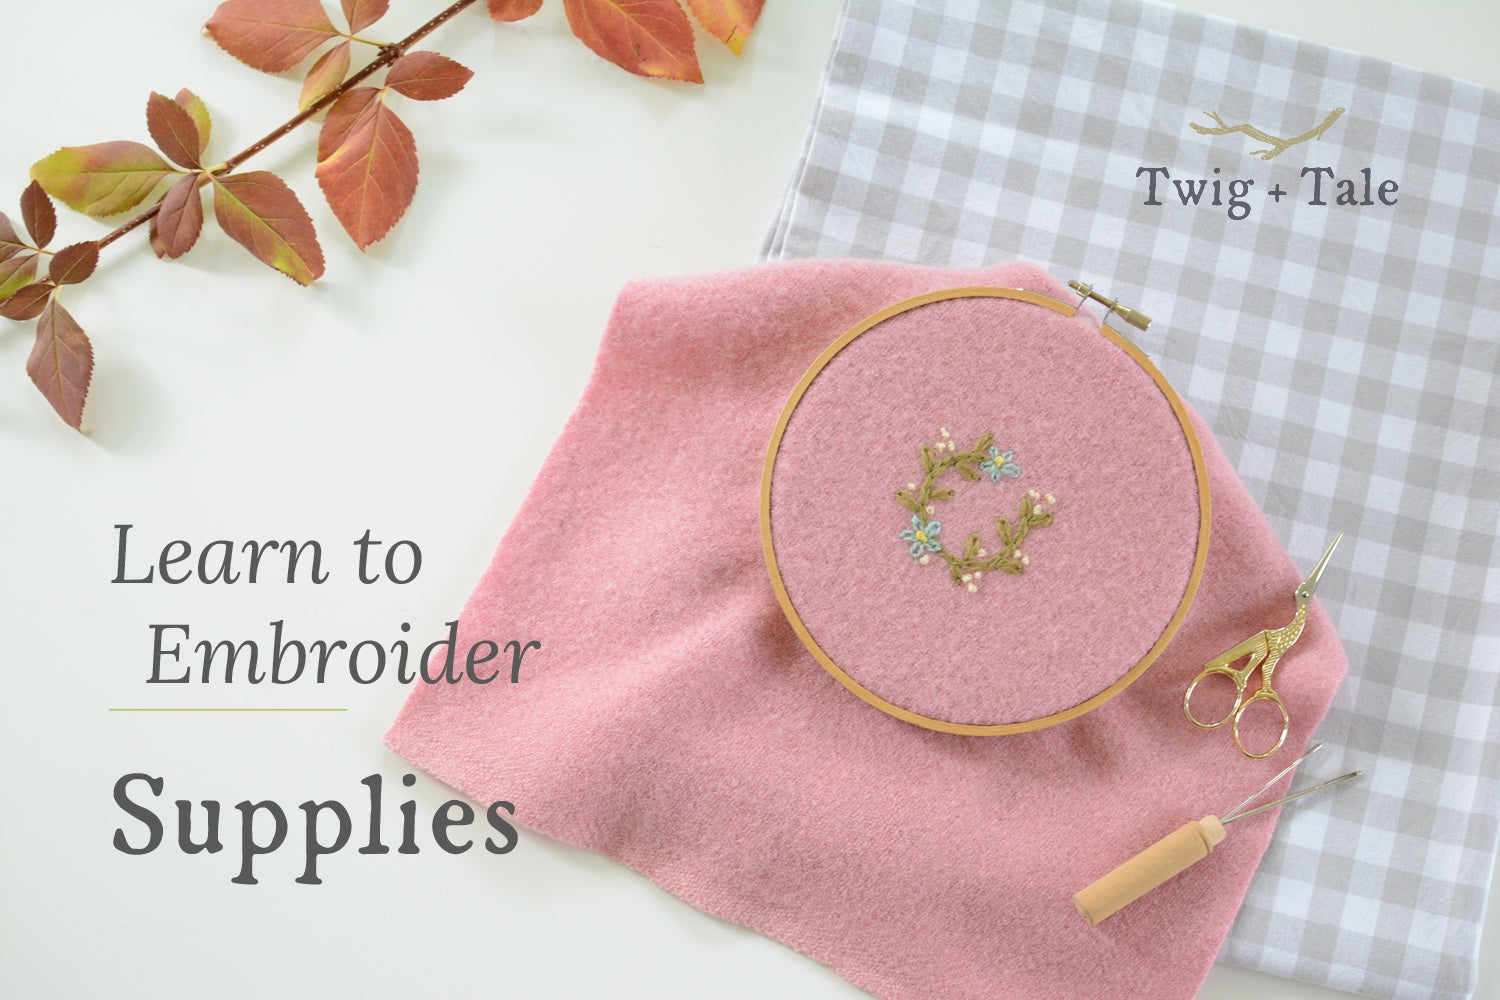 Learn to Embroider: Supplies